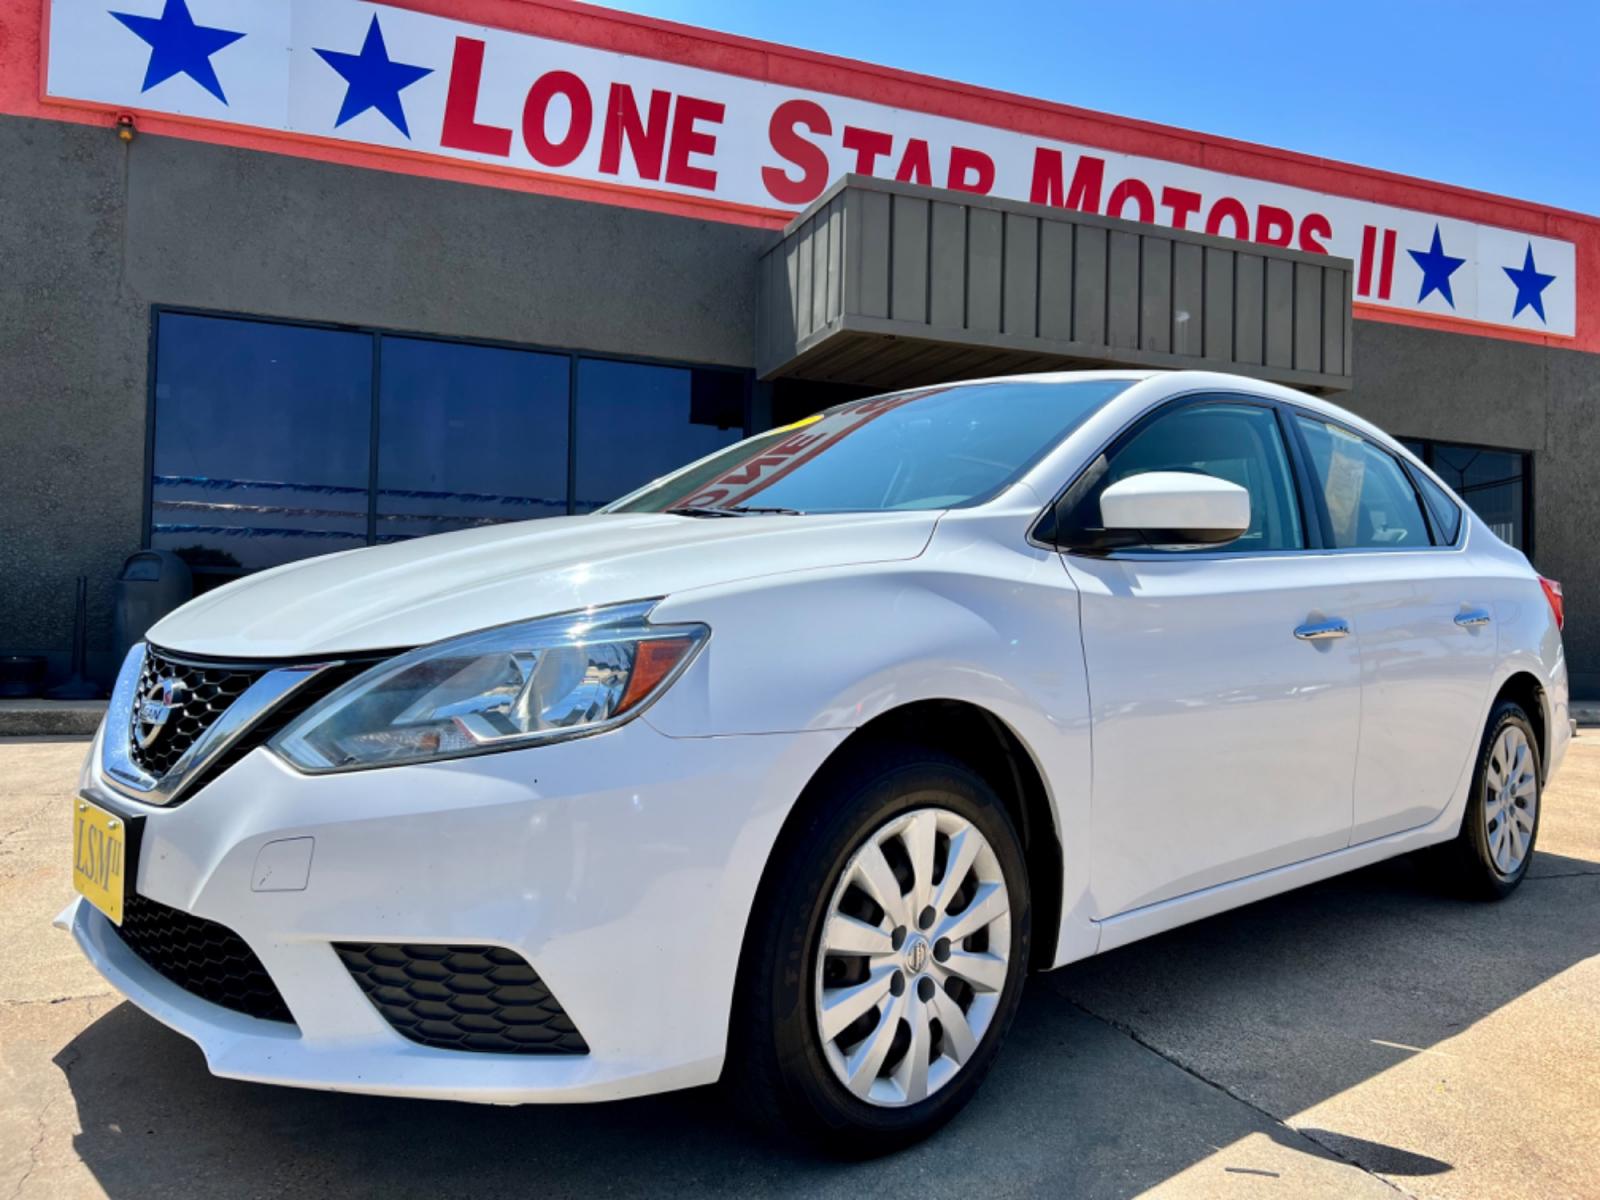 2017 WHITE NISSAN SENTRA (3N1AB7AP2HL) , located at 5900 E. Lancaster Ave., Fort Worth, TX, 76112, (817) 457-5456, 0.000000, 0.000000 - This is a 2017 NISSAN SENTRA 4 DOOR SEDAN that is in excellent condition. There are no dents or scratches. The interior is clean with no rips or tears or stains. All power windows, door locks and seats. Ice cold AC for those hot Texas summer days. It is equipped with a CD player, AM/FM radio, AUX po - Photo #1